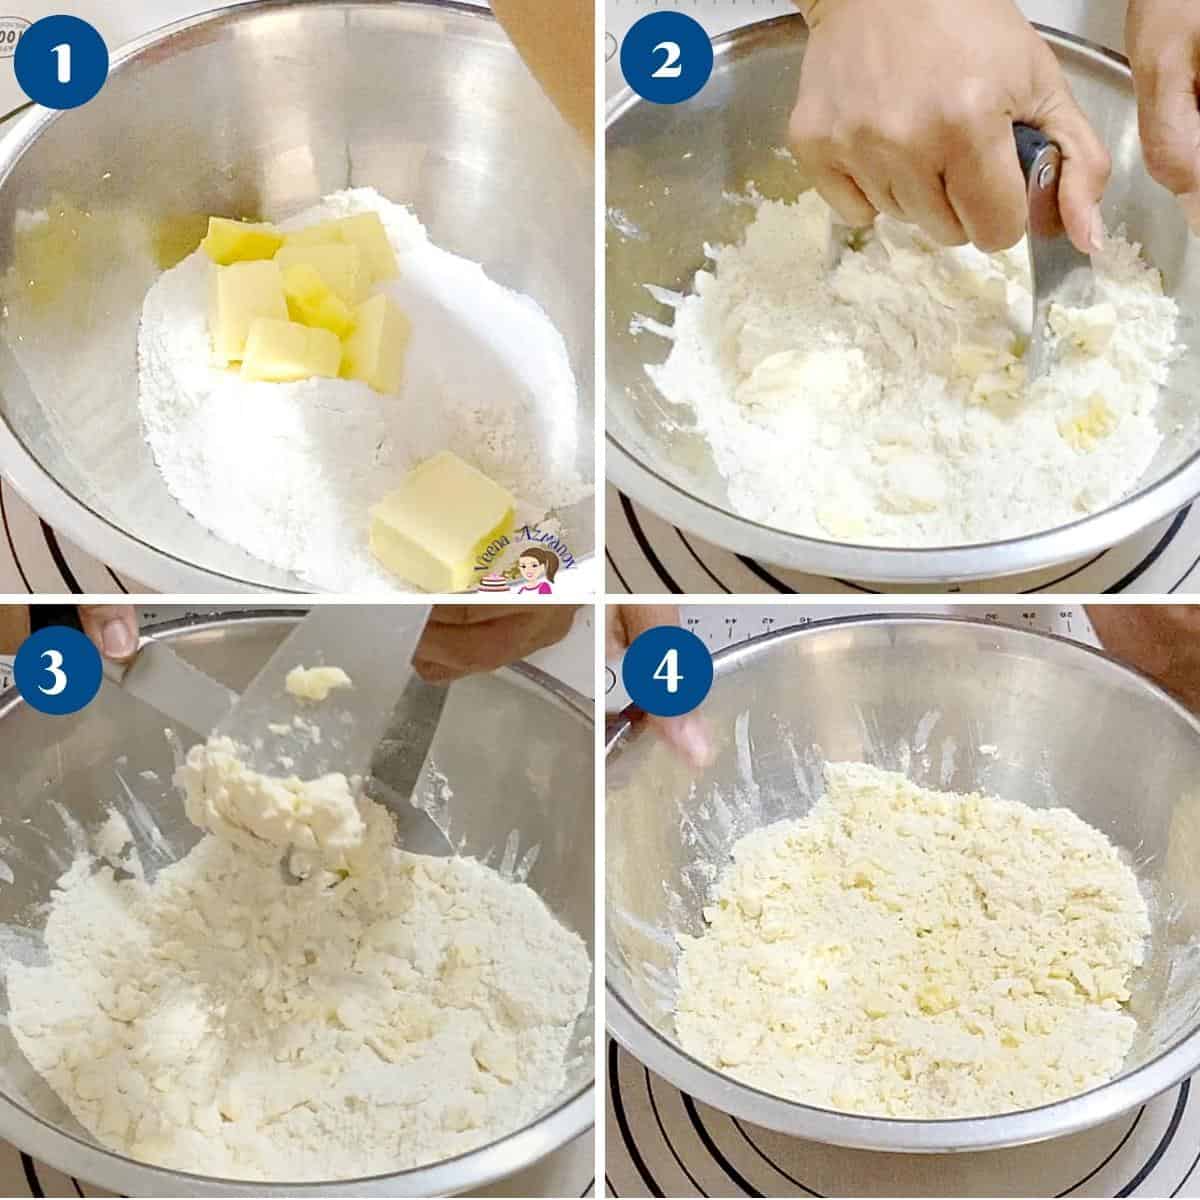 Step by step pictures how to make crumbles.